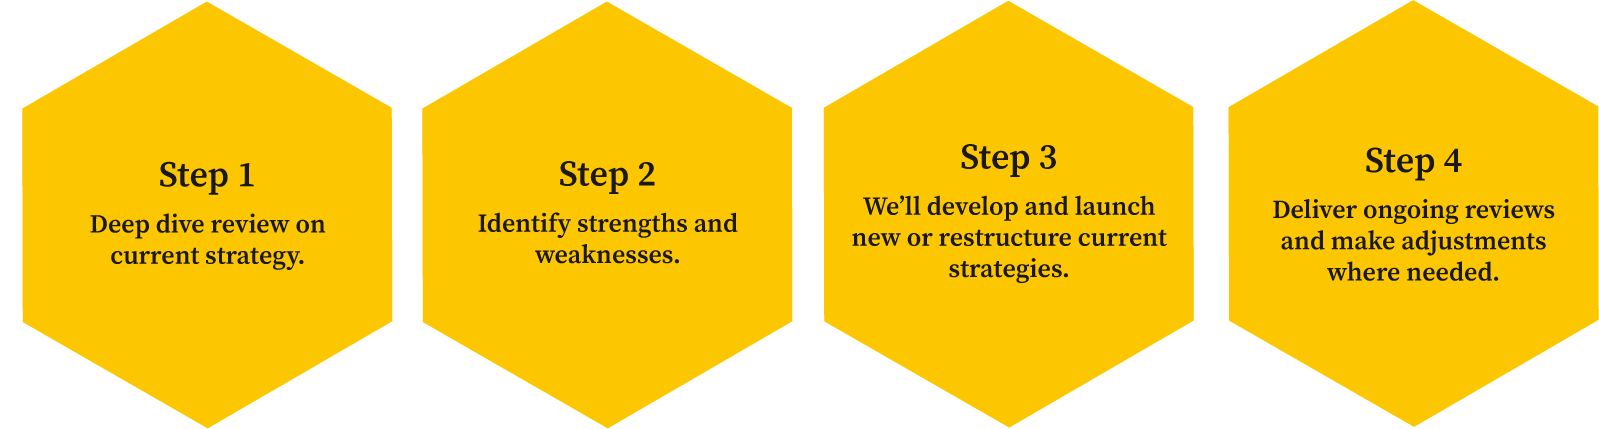 Buzz Business Development - Devise and Implement Strategies 4 Steps